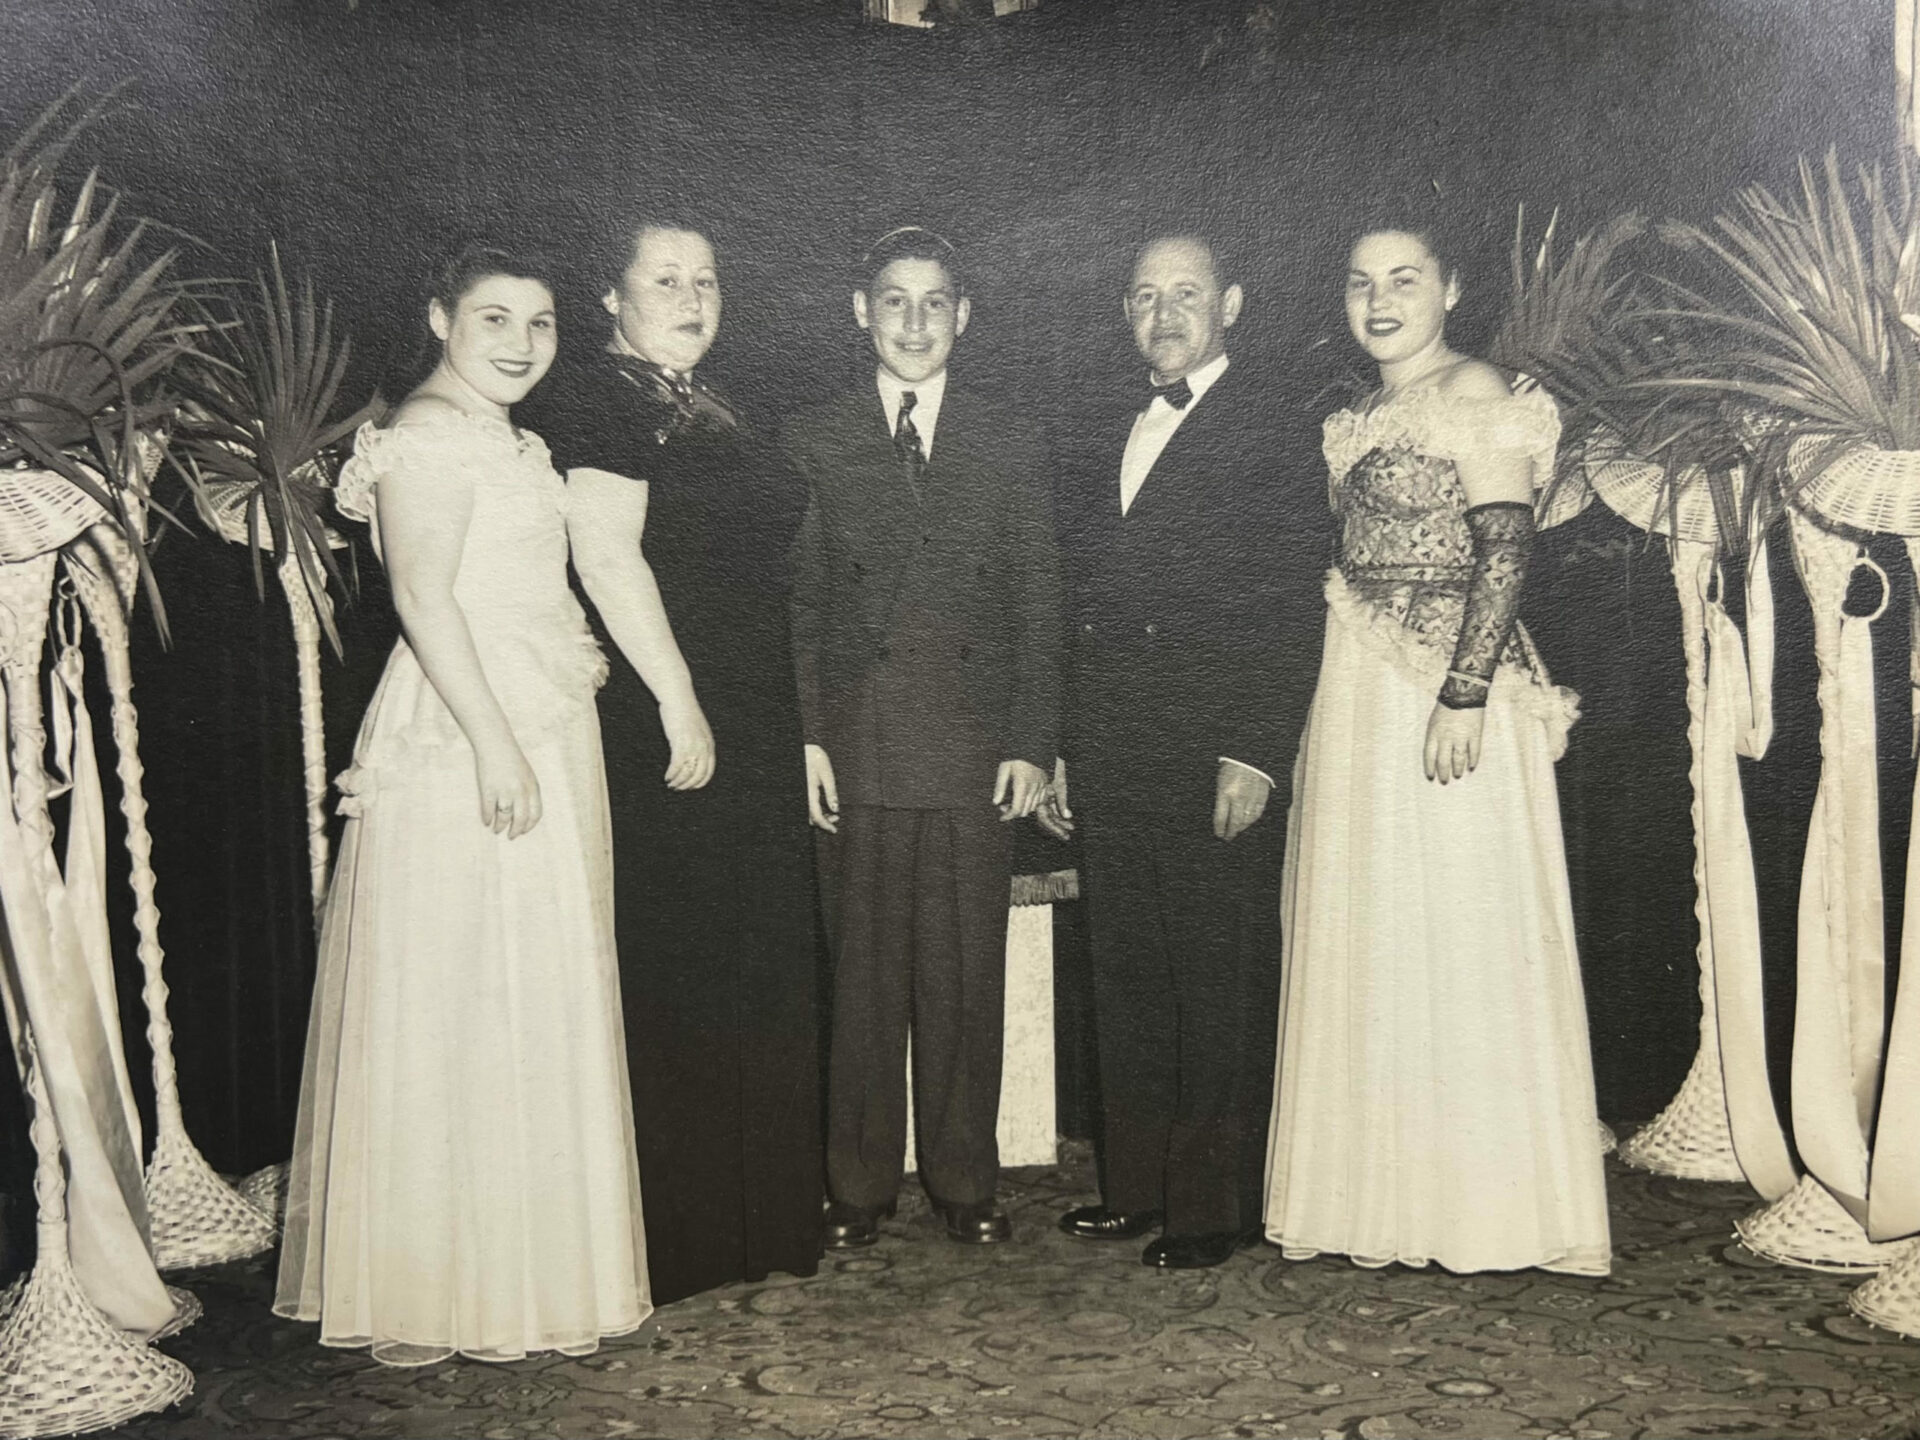 A photograph from 1945 of a man at his bar mitzvah with his parents and two sisters standing next to him.